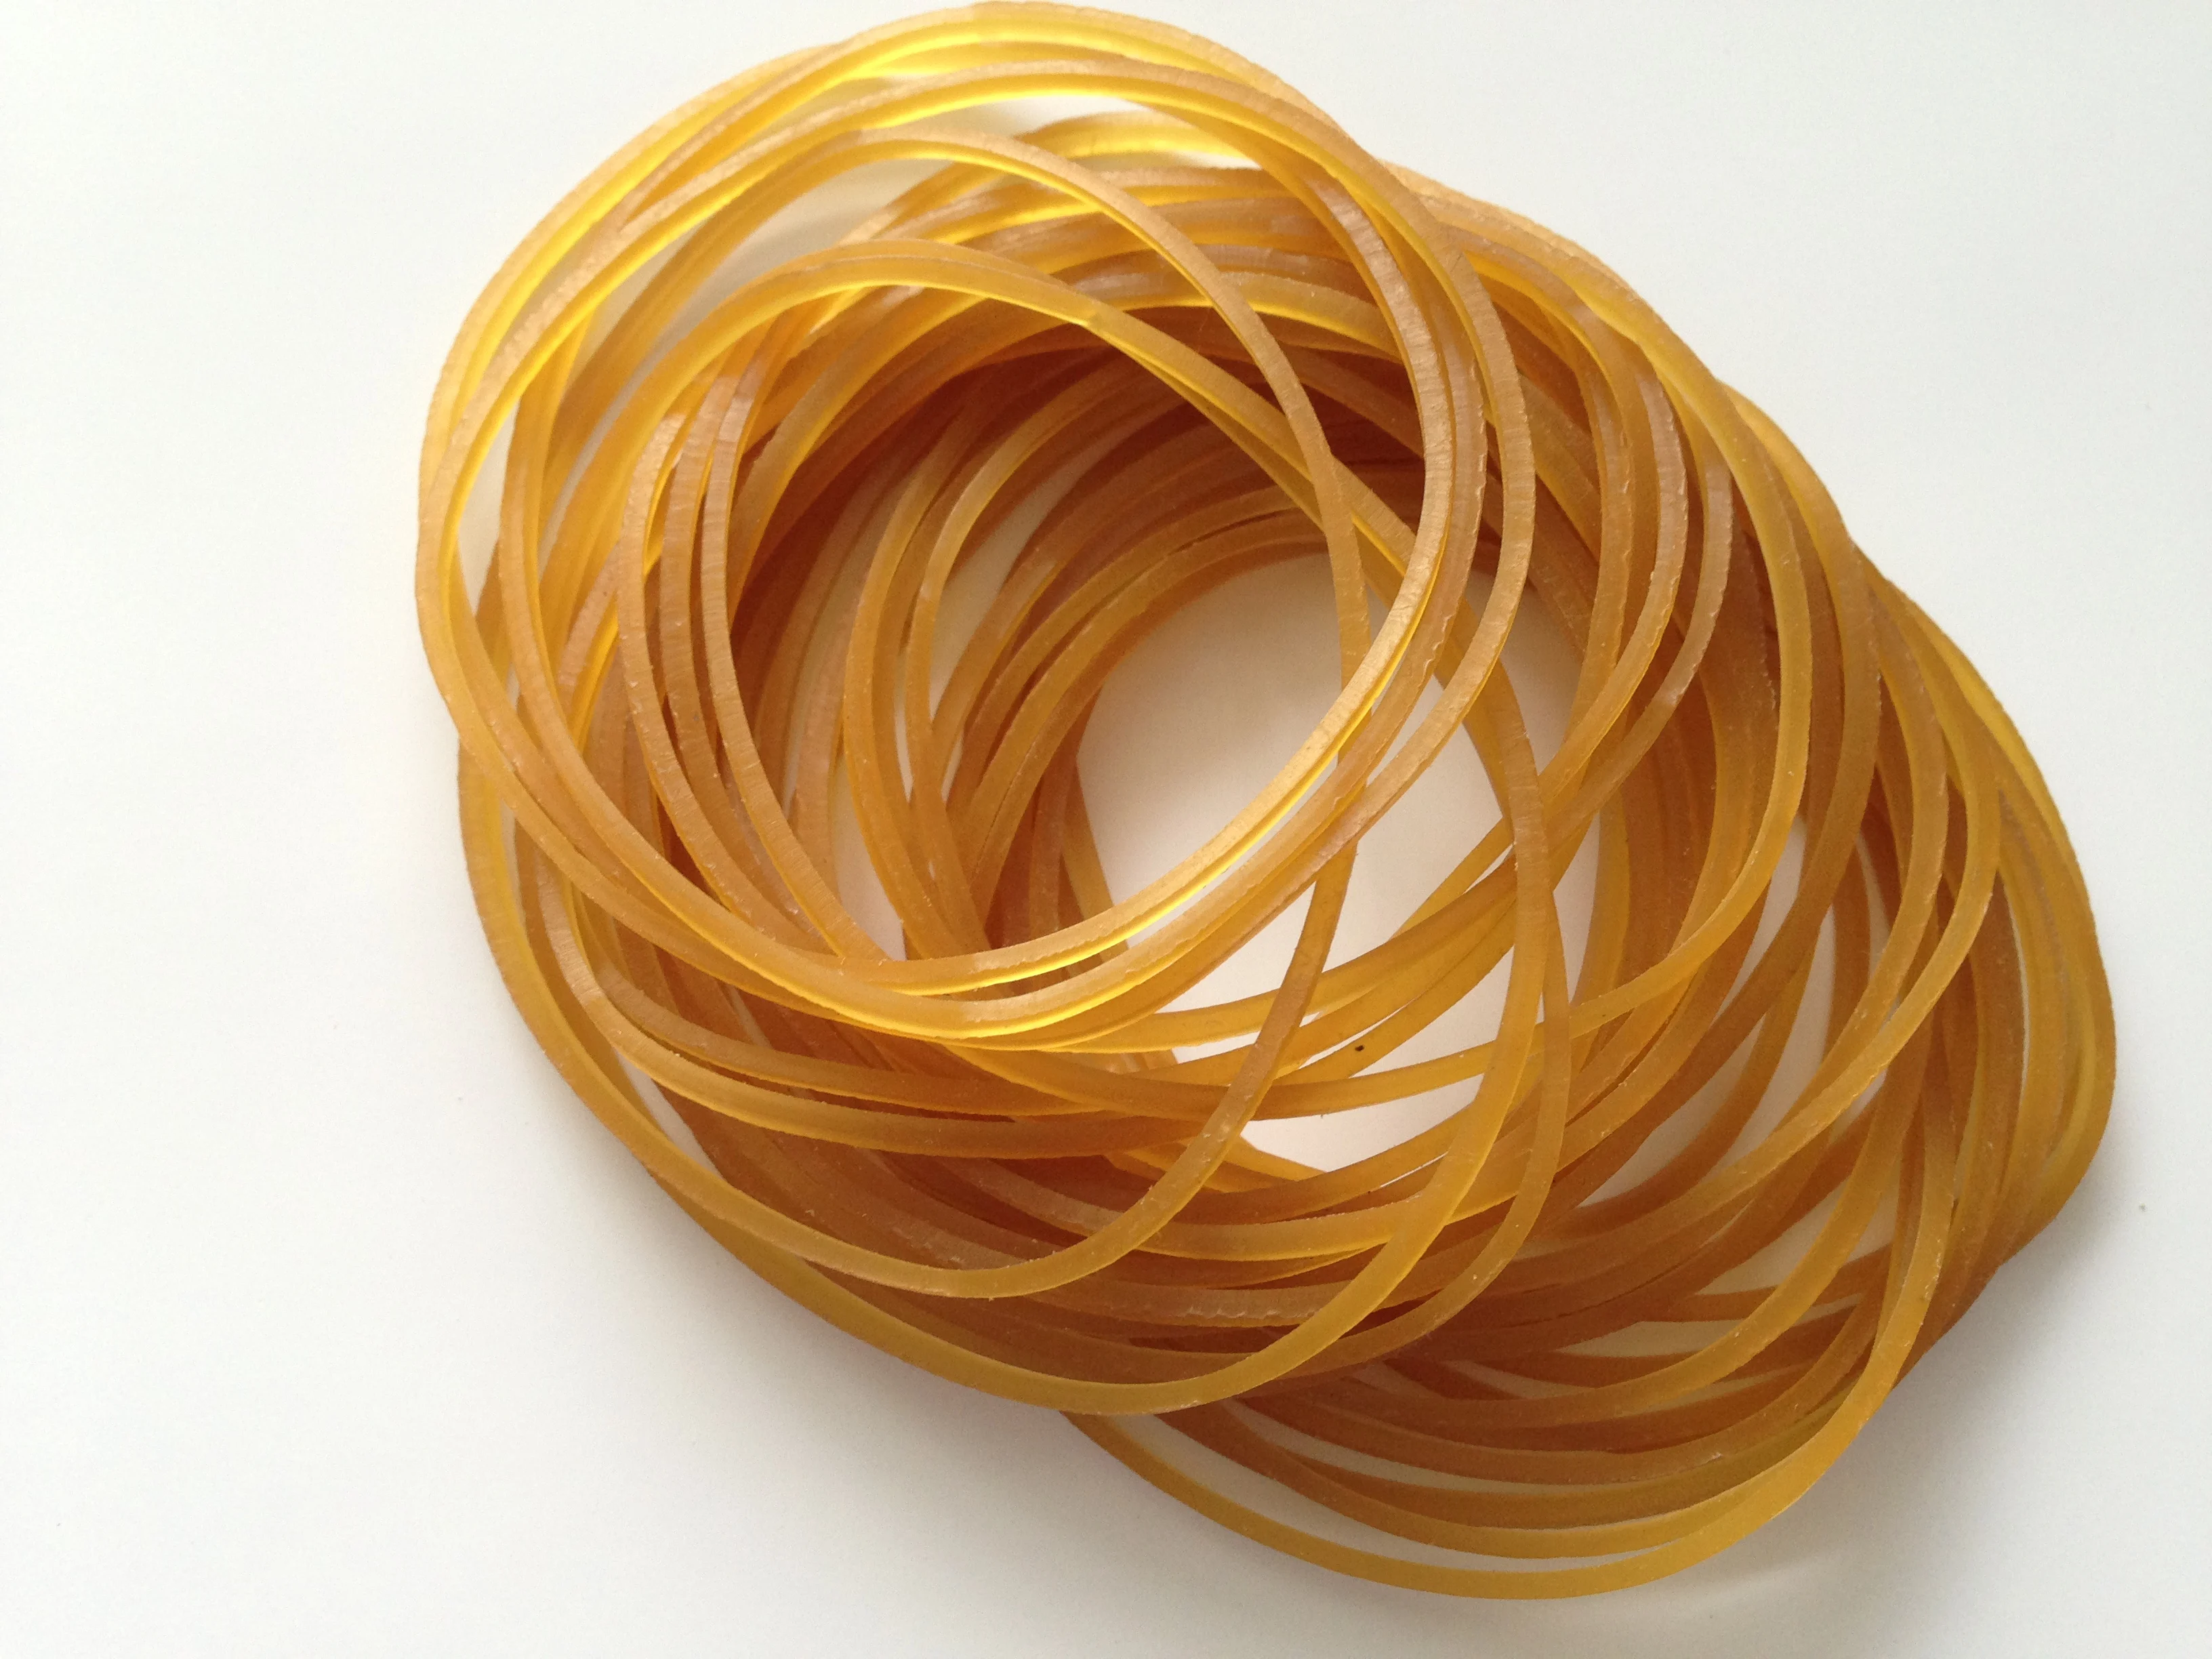 super strong rubber bands